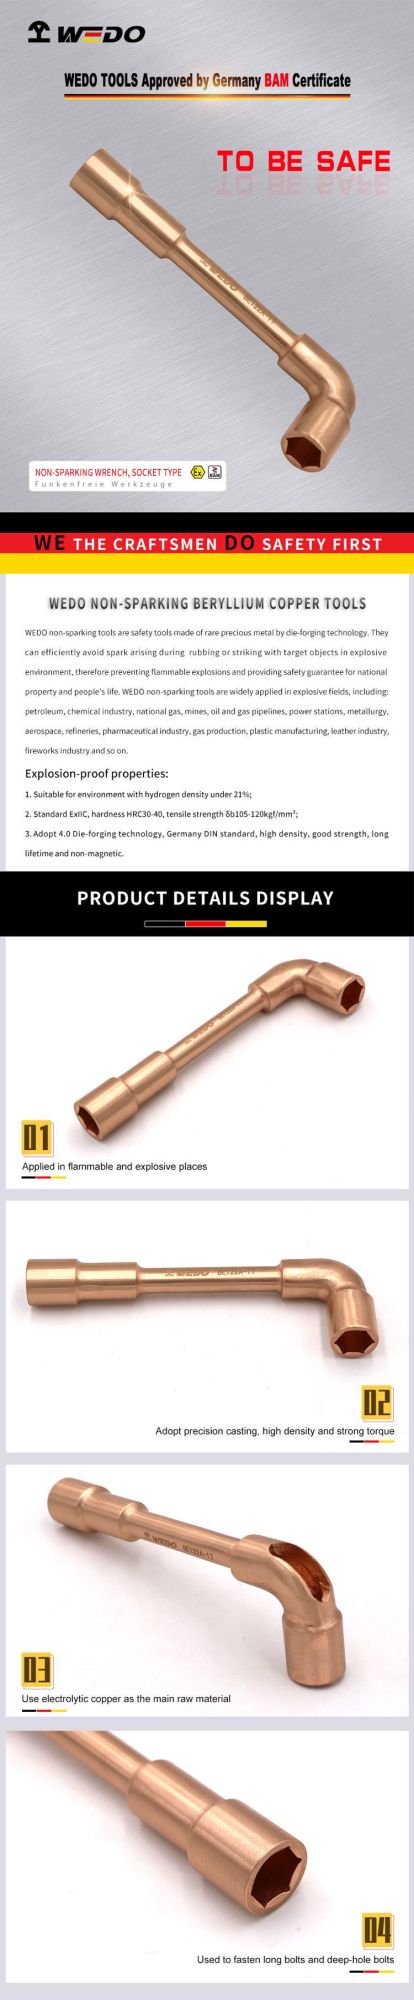 WEDO Beryllium Copper Spanner Non-Sparking Socket Wrench L-Type High Quality Spanner Bam/FM/GS Certified